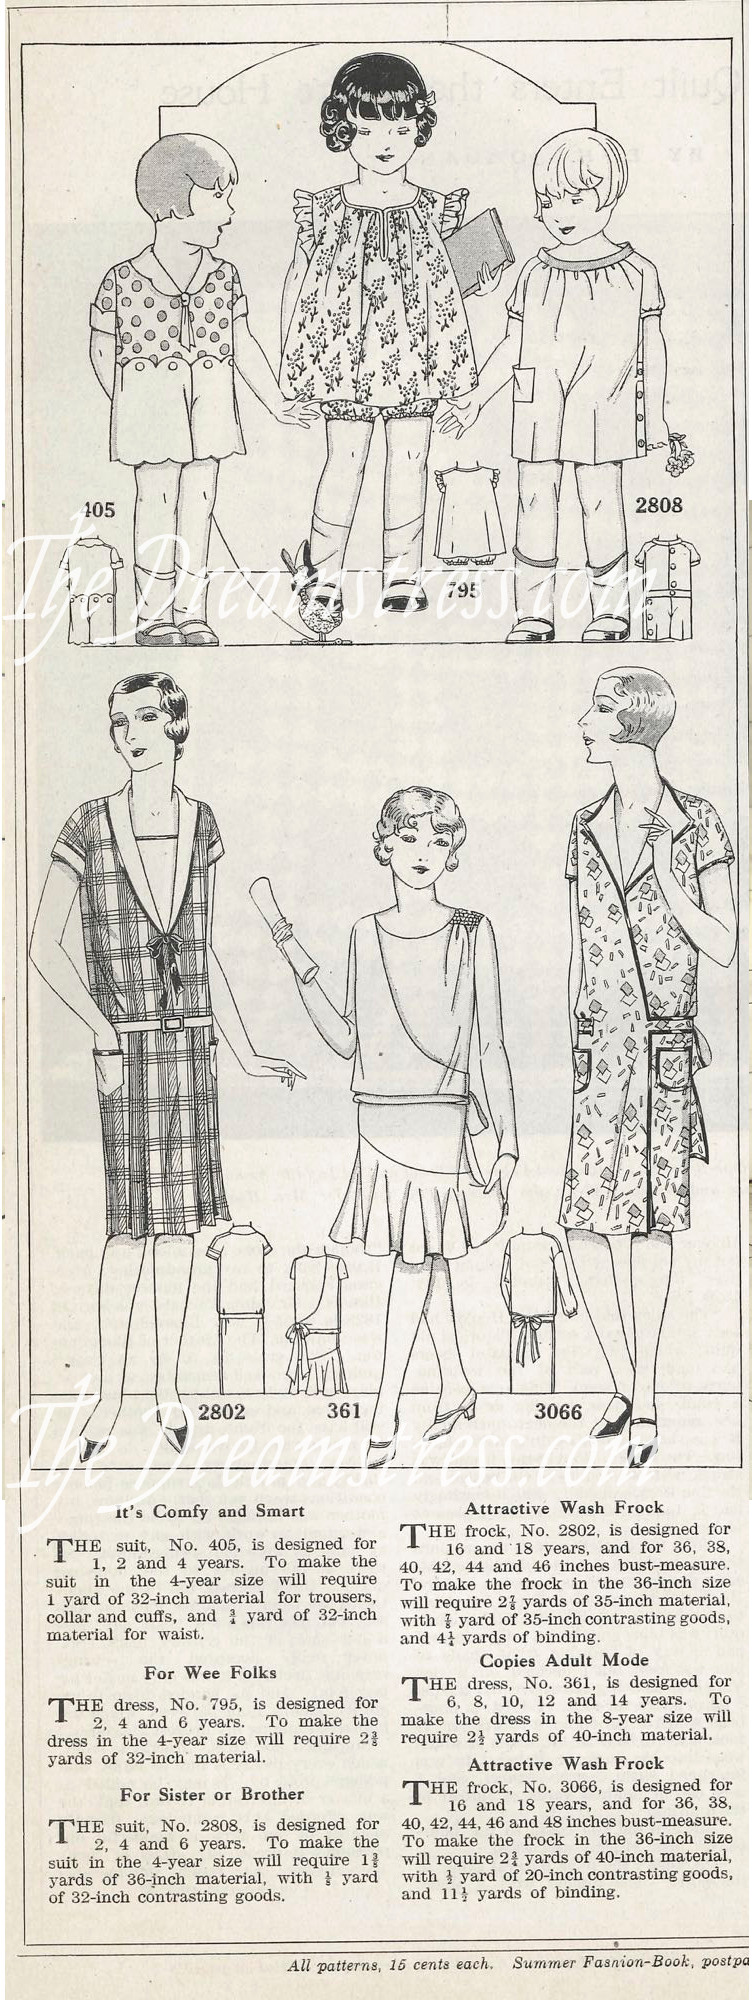 Clothes for toddlers and girls, 1929, thedreamstress.com